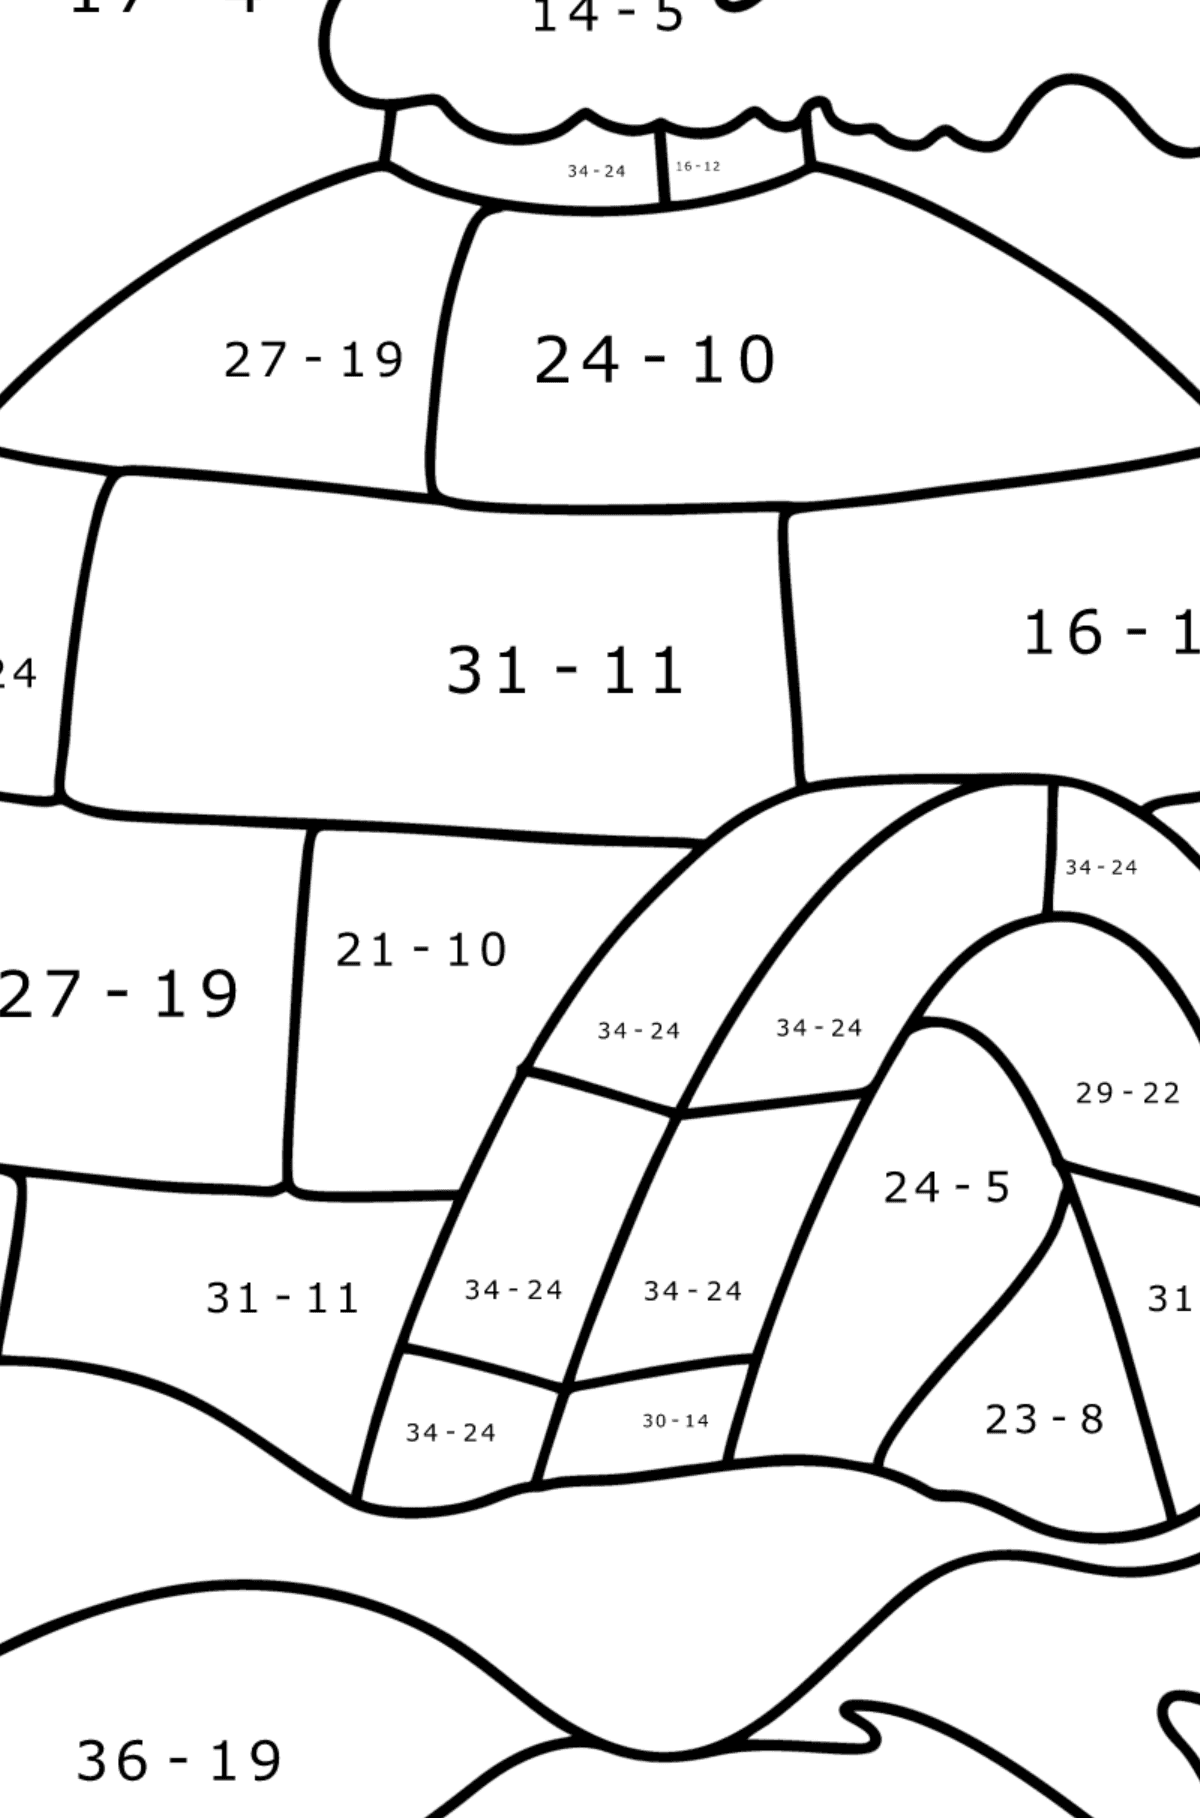 Igloo ice House coloring page - Math Coloring - Subtraction for Kids